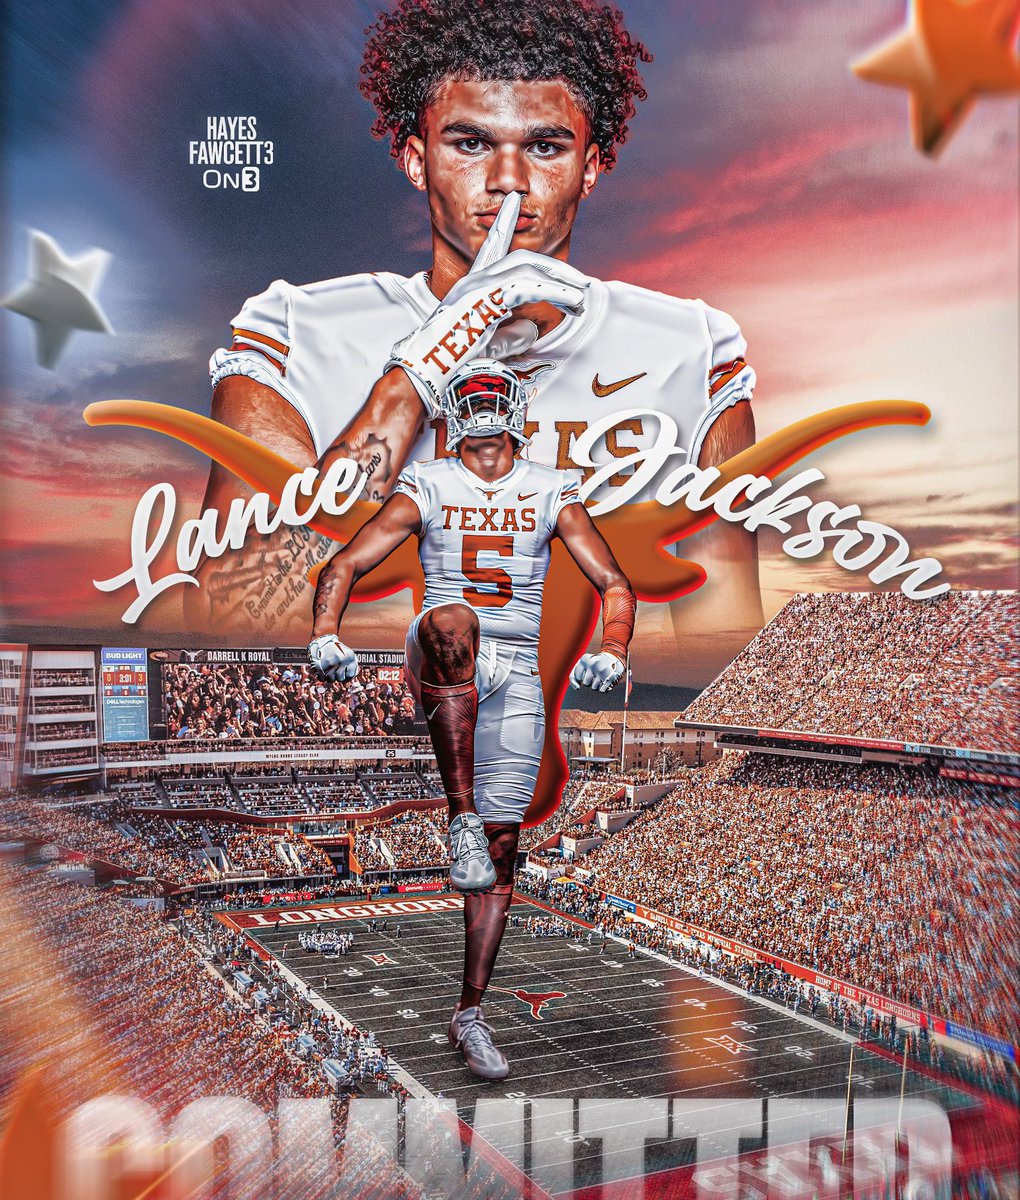 Committed to The University of Texas🤘🏽🟠@Hayesfawcett3